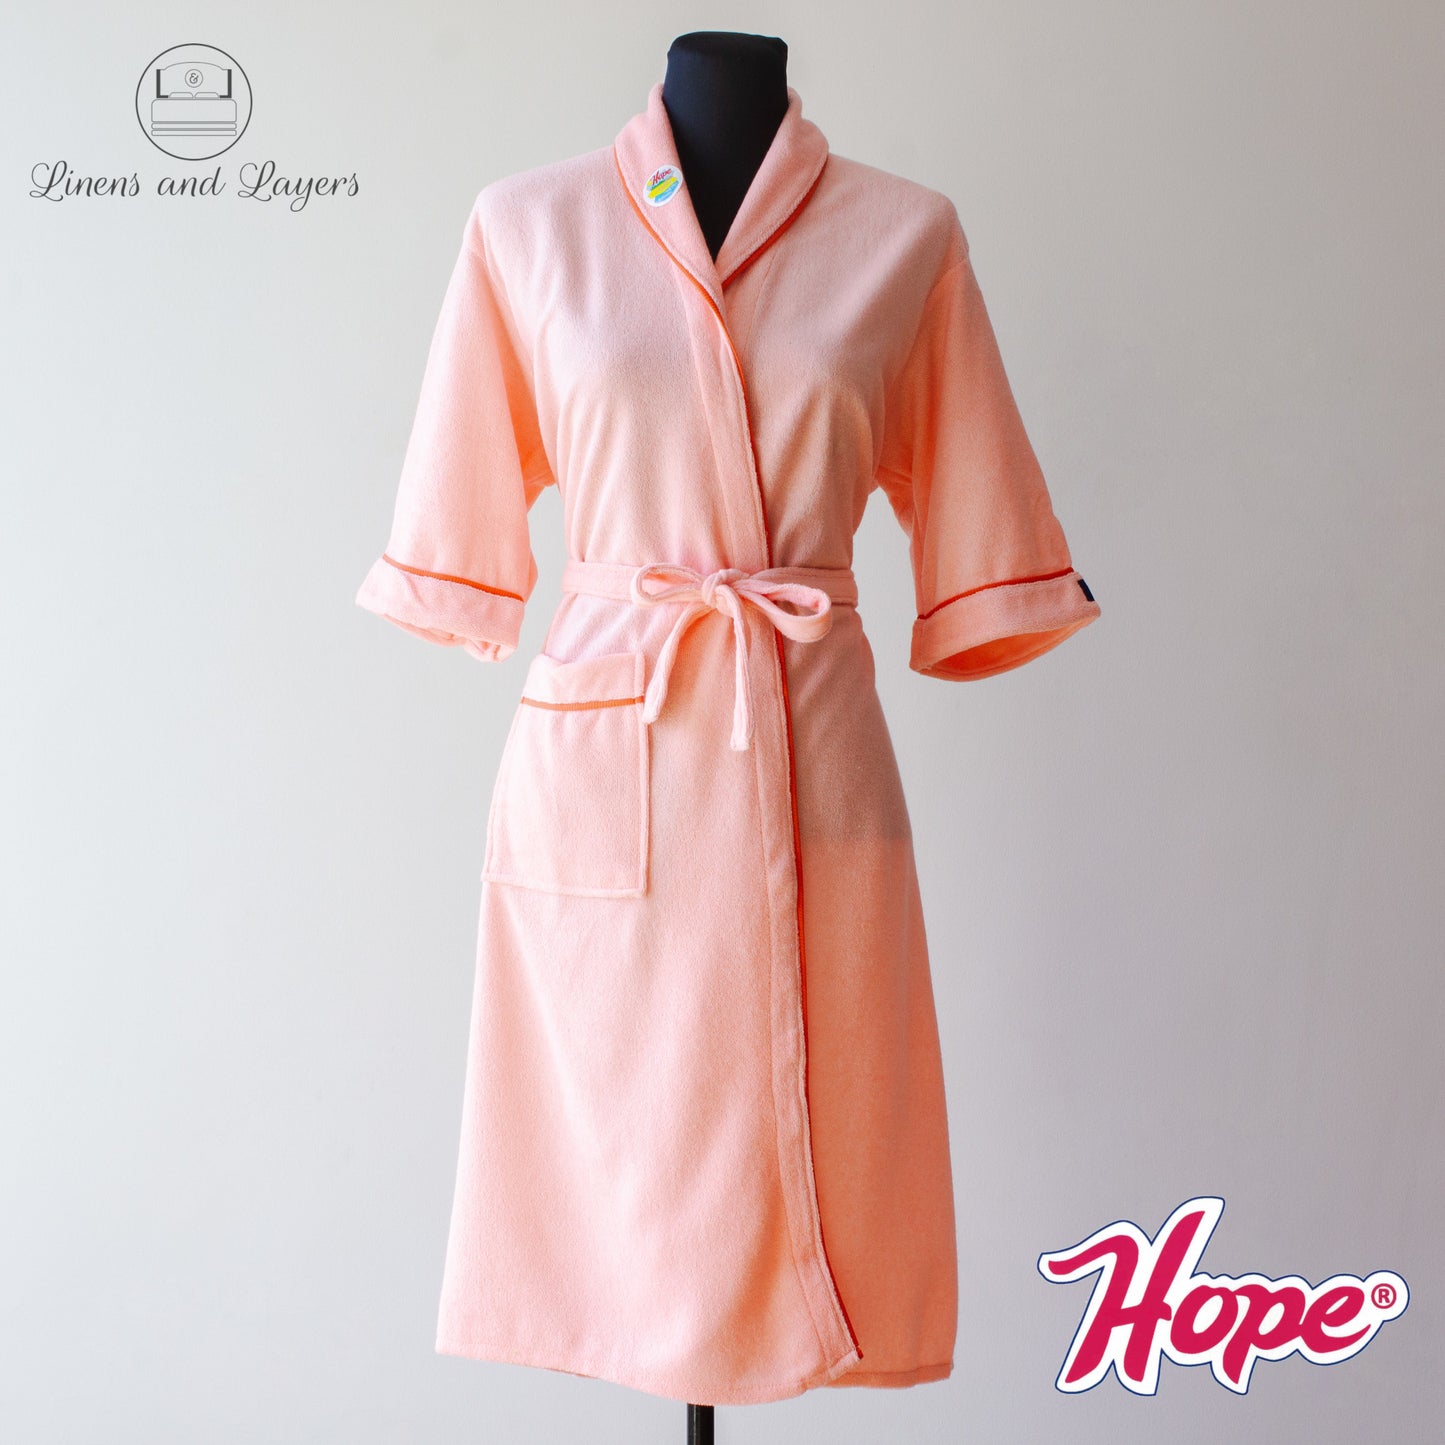 Hope Bathrobe (600 grams) for Adults - Terrycloth